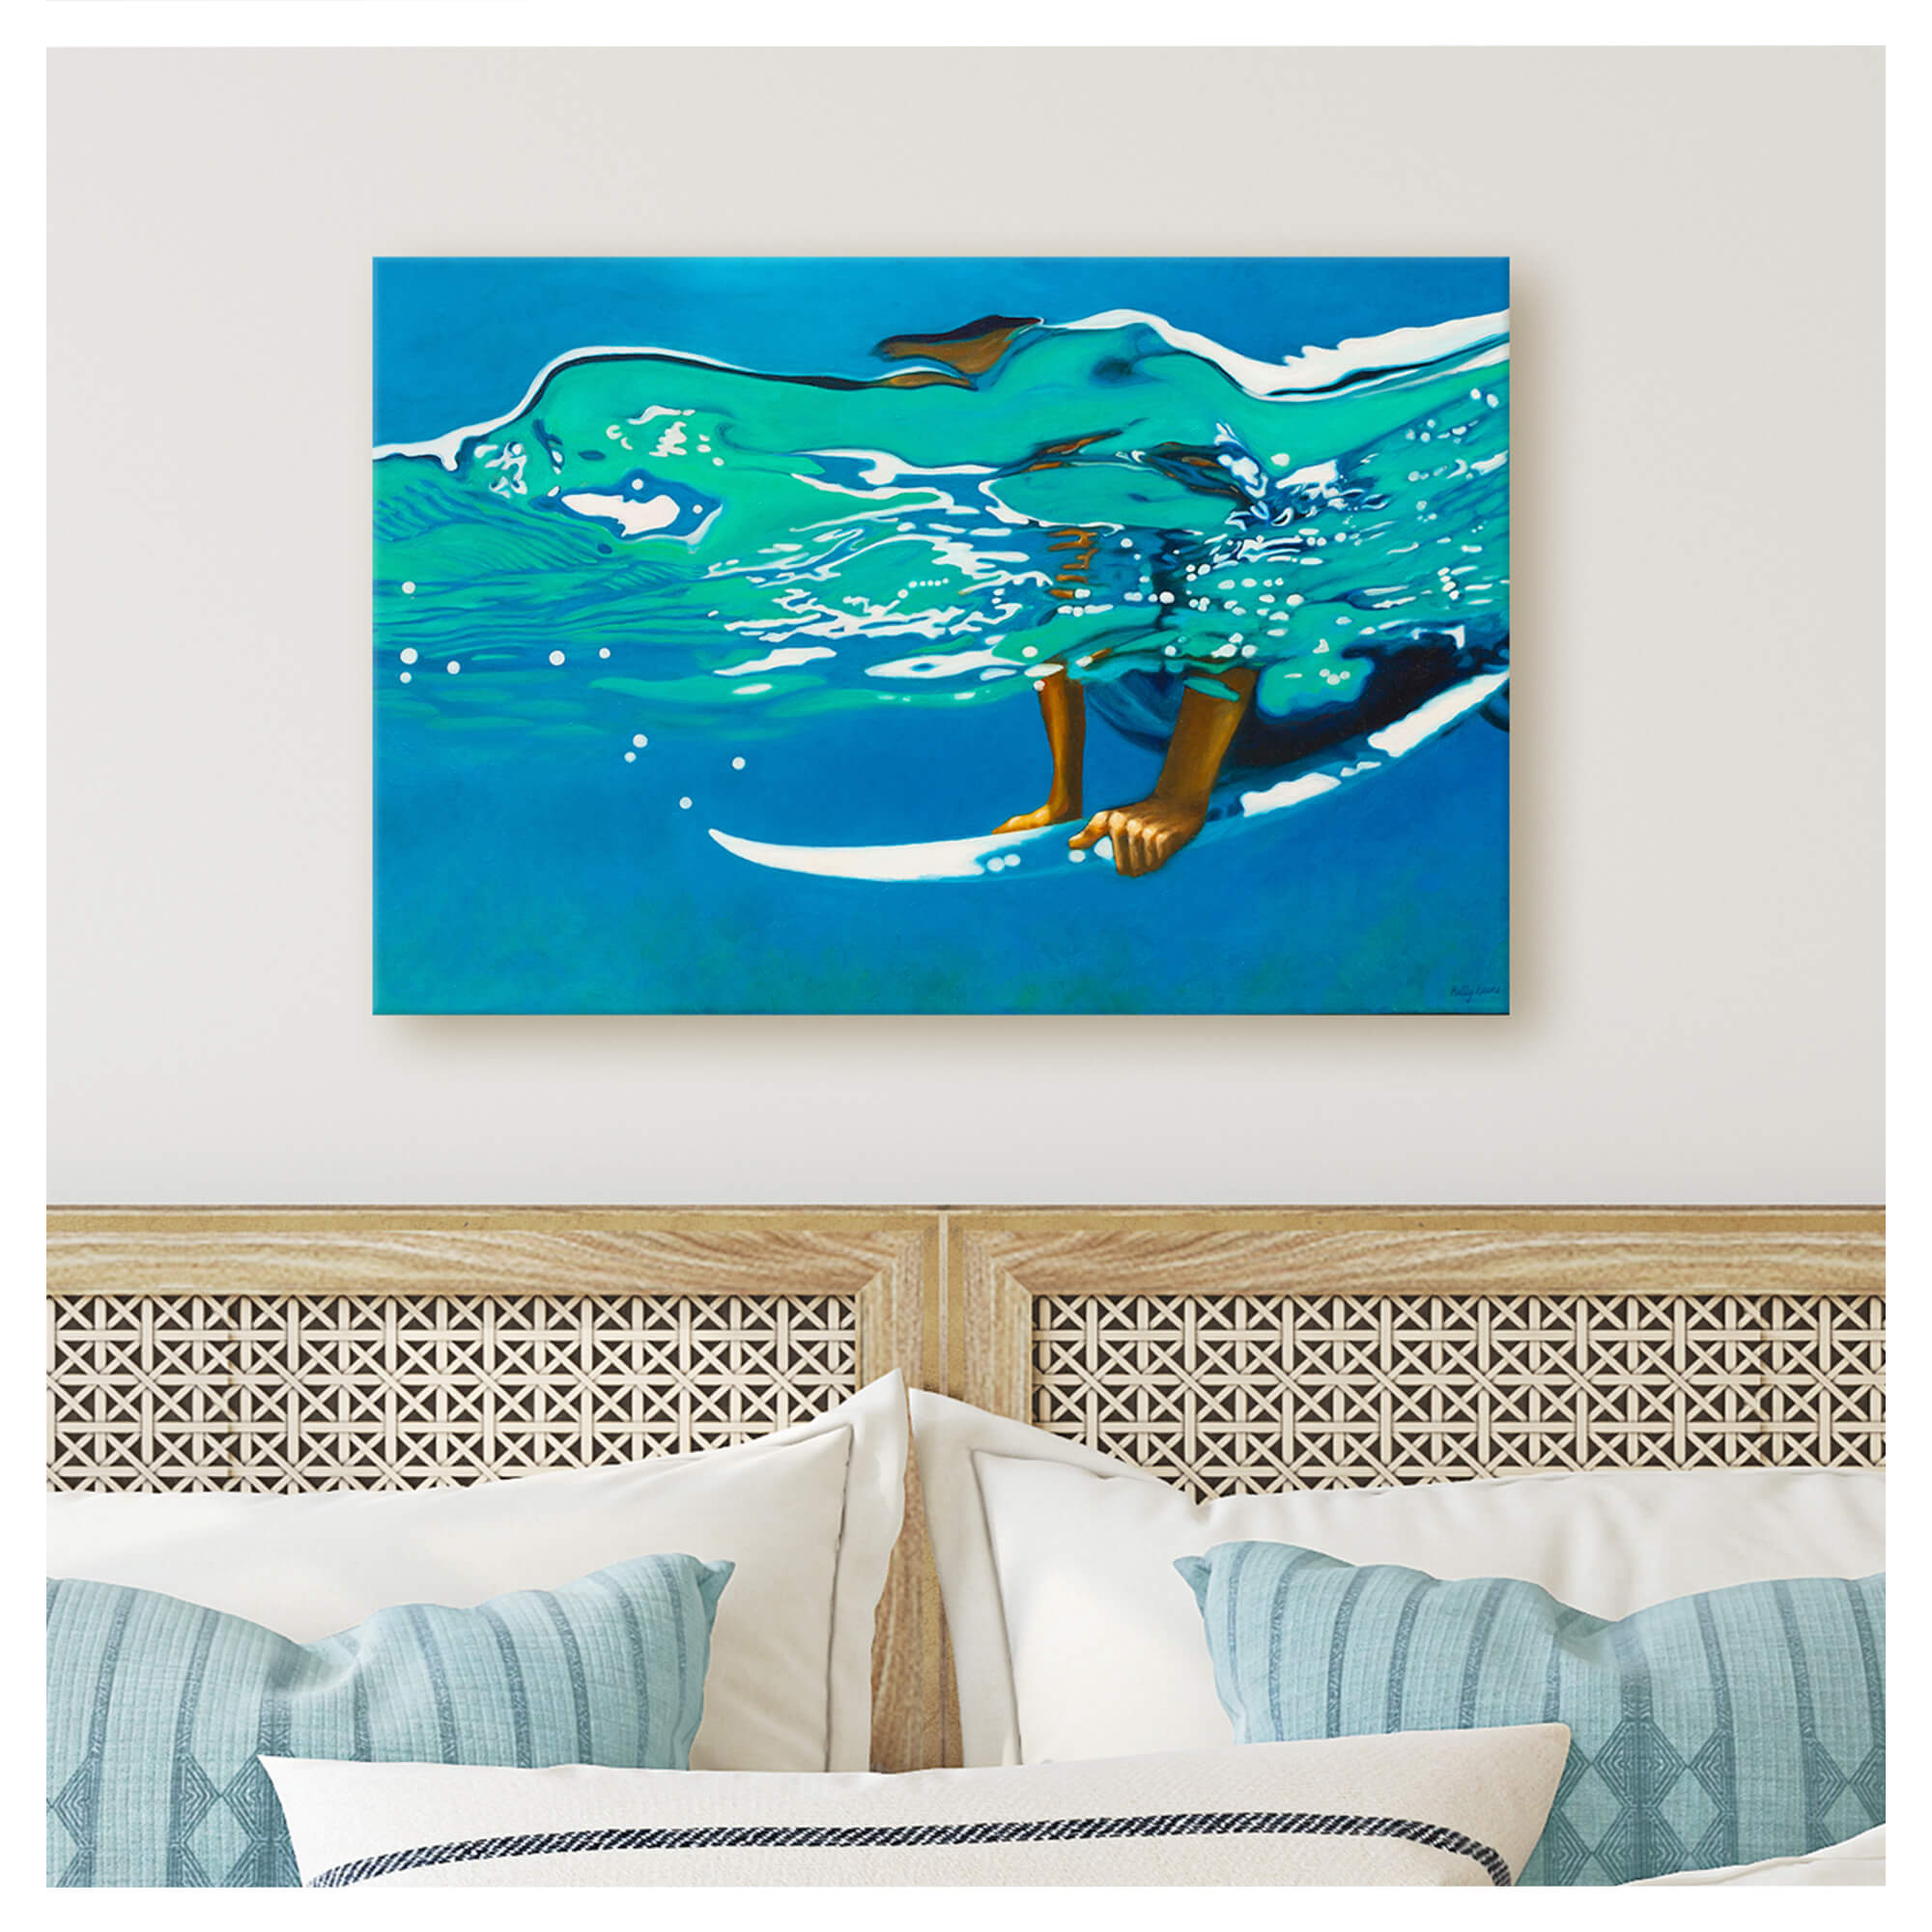 Canvas art print featuring a person surfing  by hawaii artist Kelly Keane